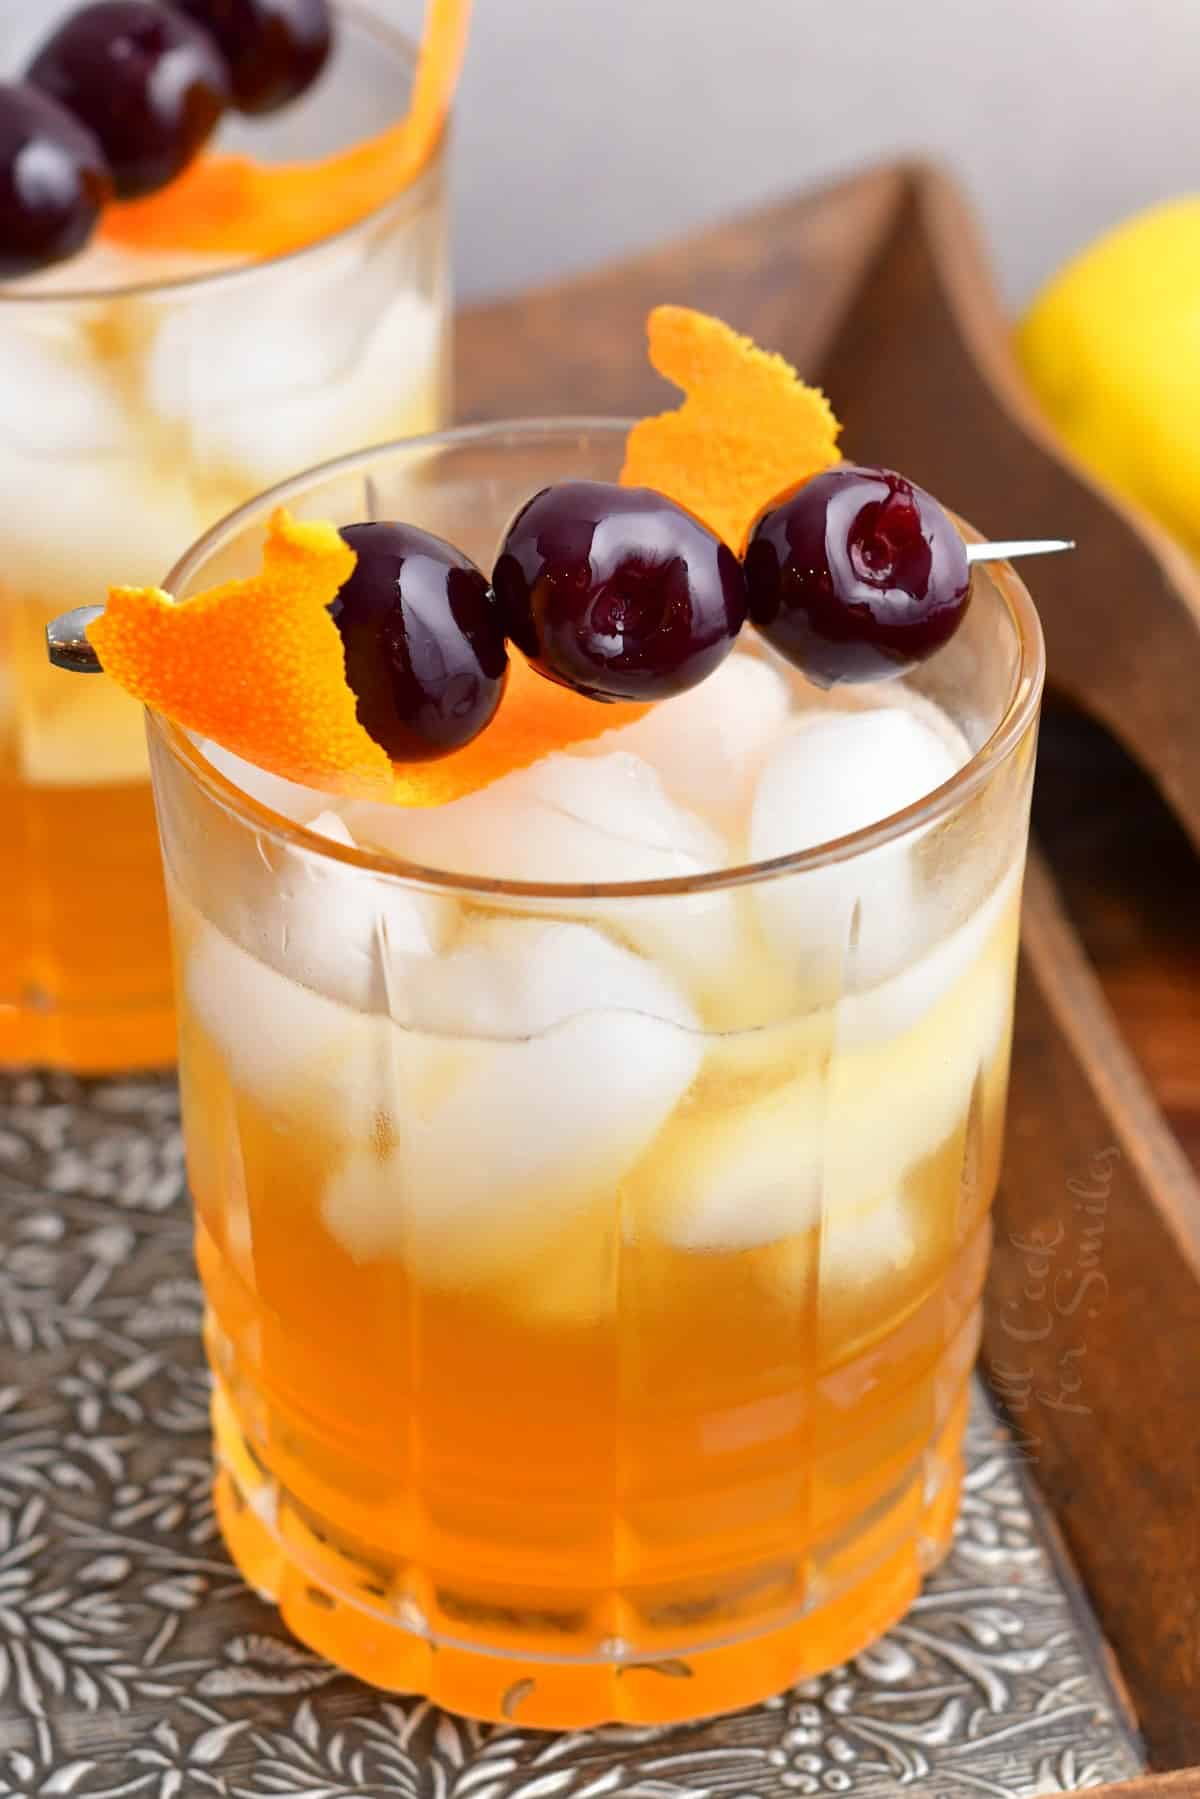 Amaretto Sour - A Classic Amaretto Cocktail That&amp;#39;s Not Too Sour or Sweet